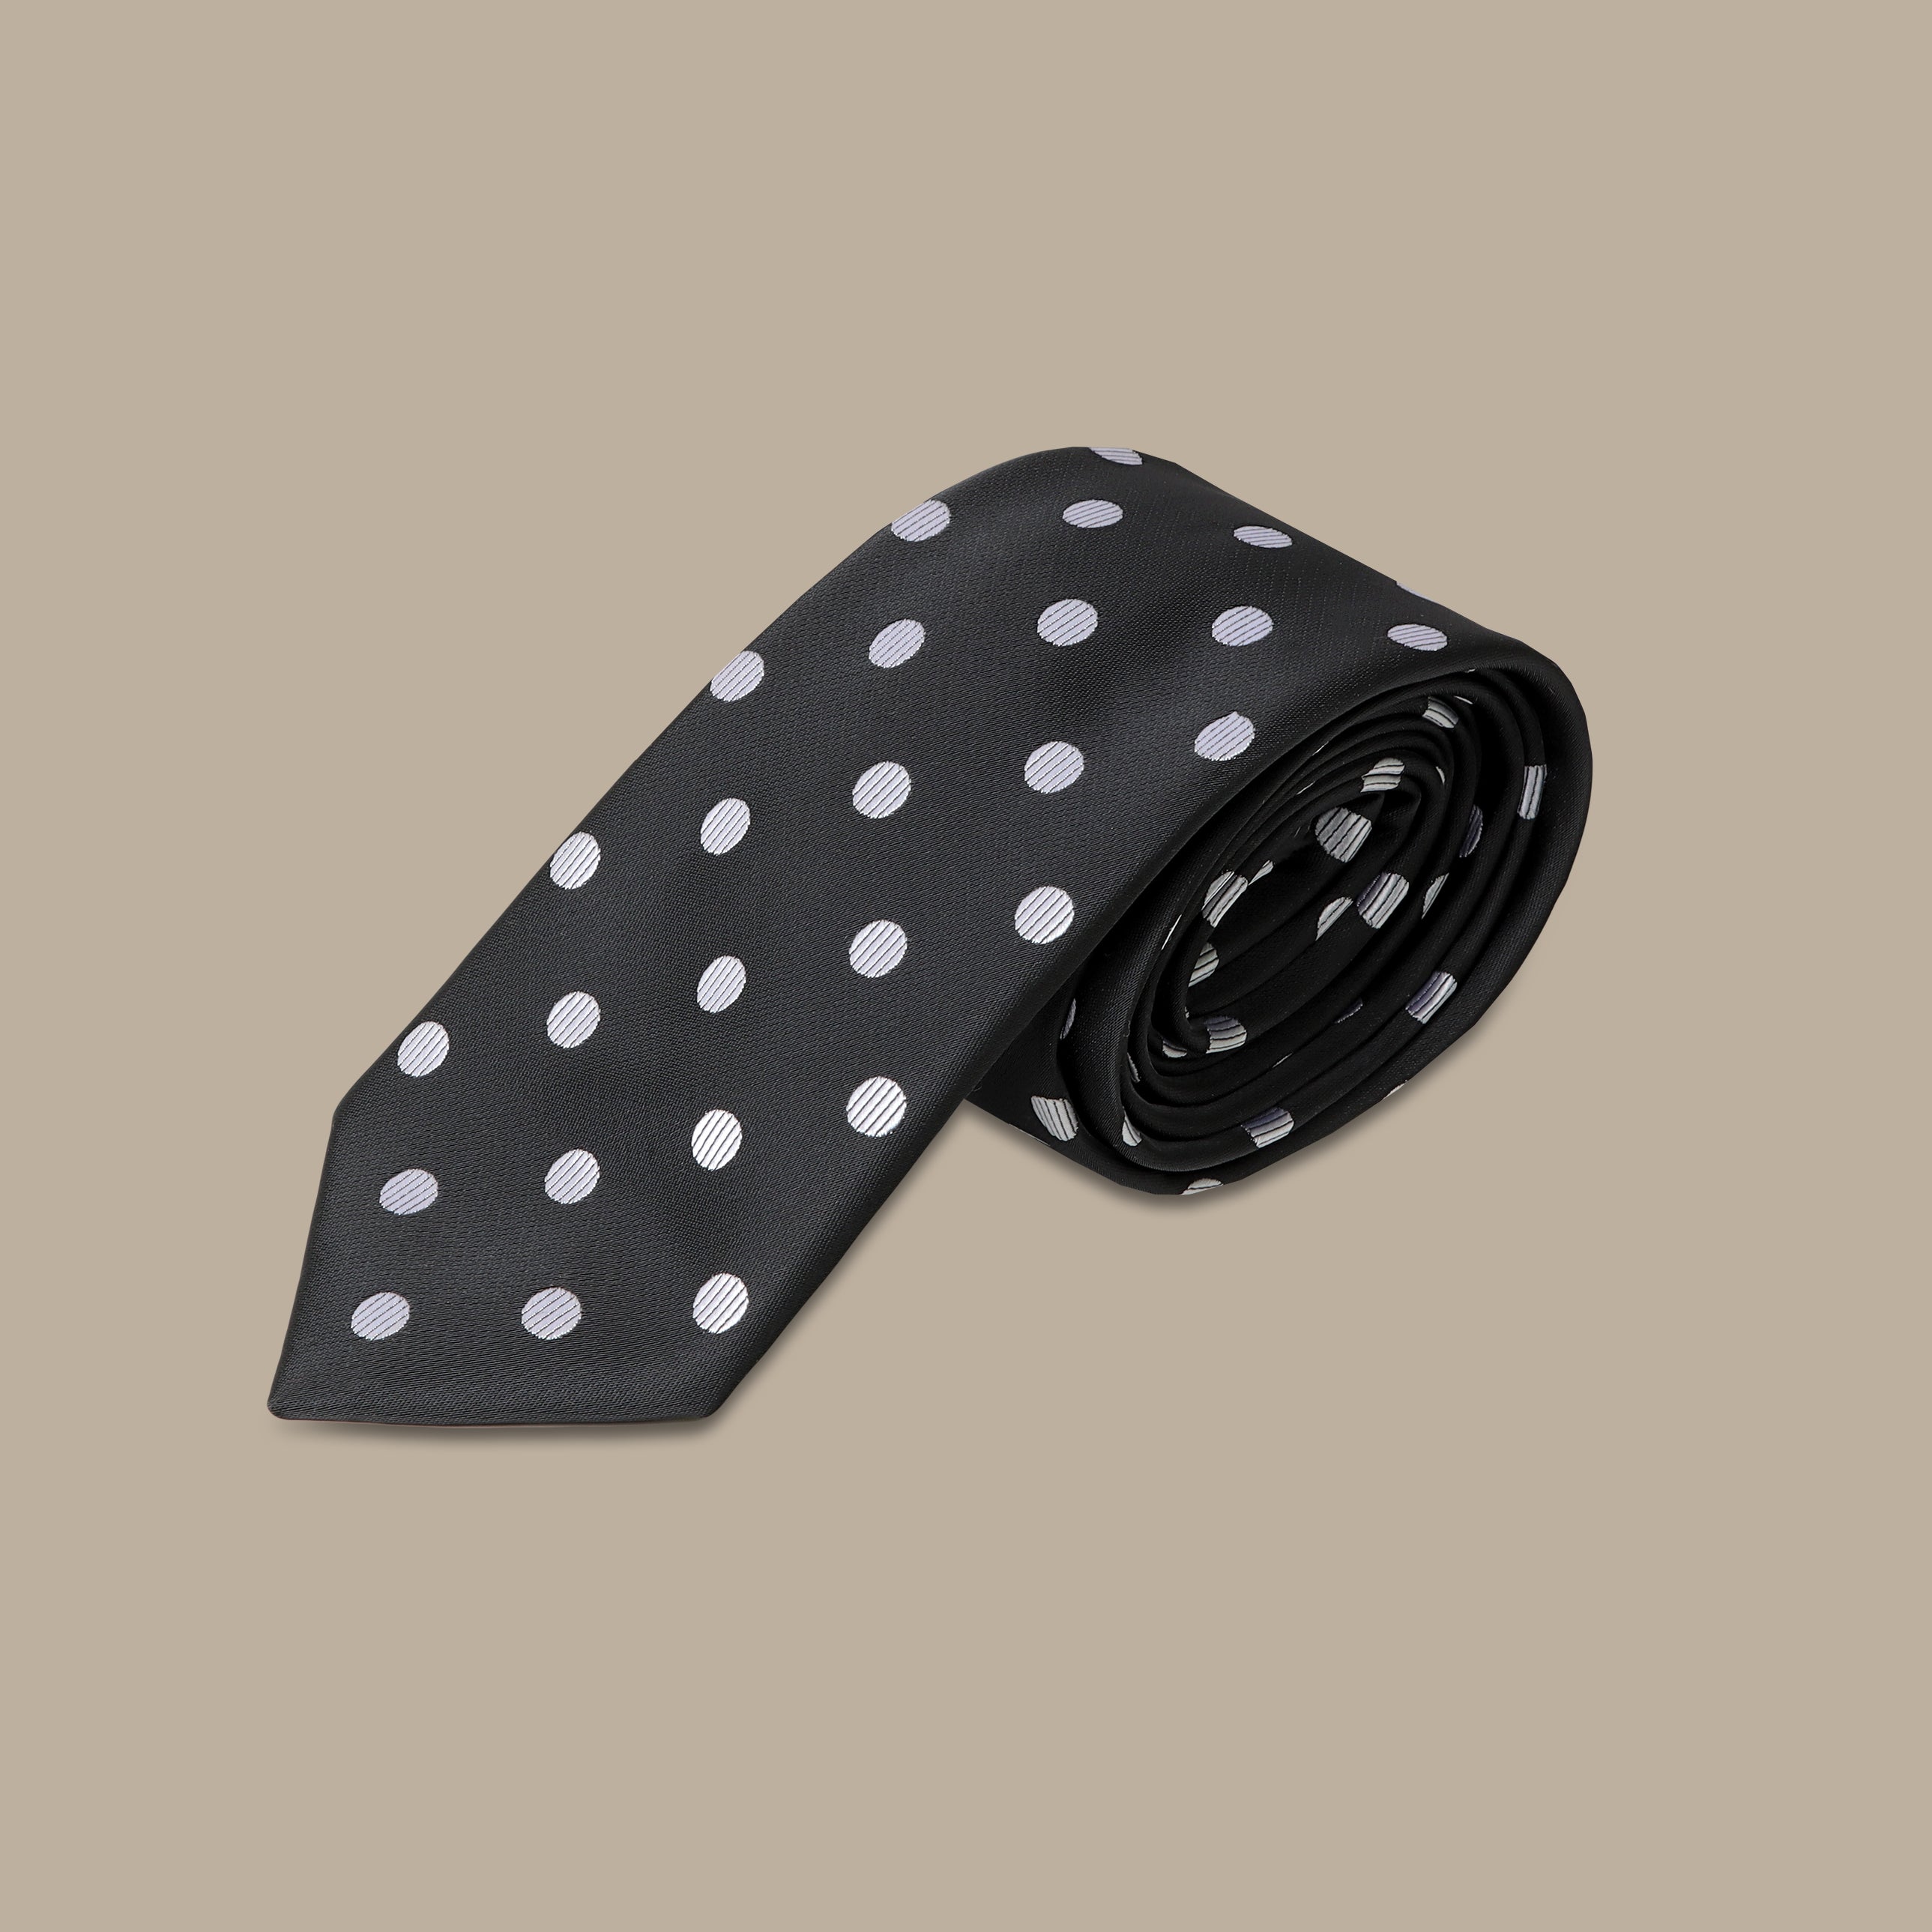 Classic Elegance: Navy Black/White Dotted Tie Set